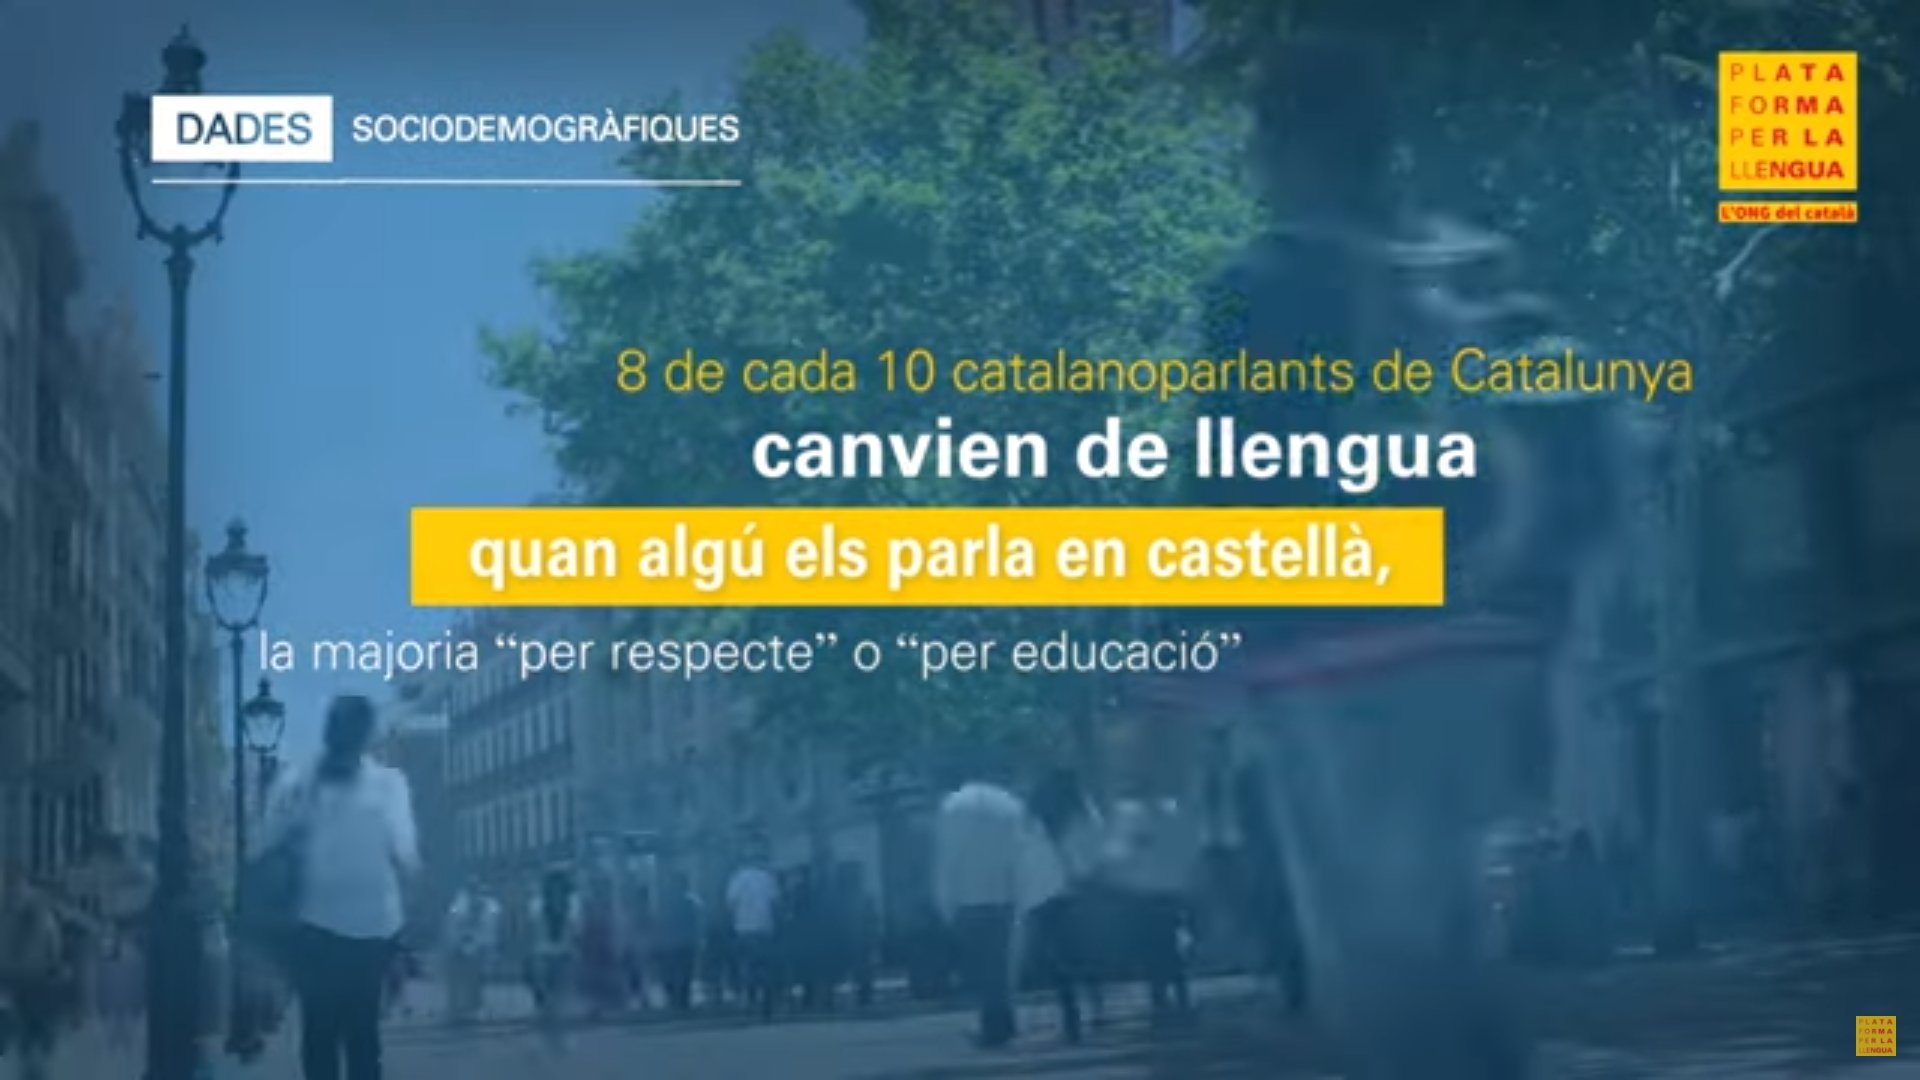 Report: 8 out of 10 Catalan speakers cede to Spanish speakers and switch languages